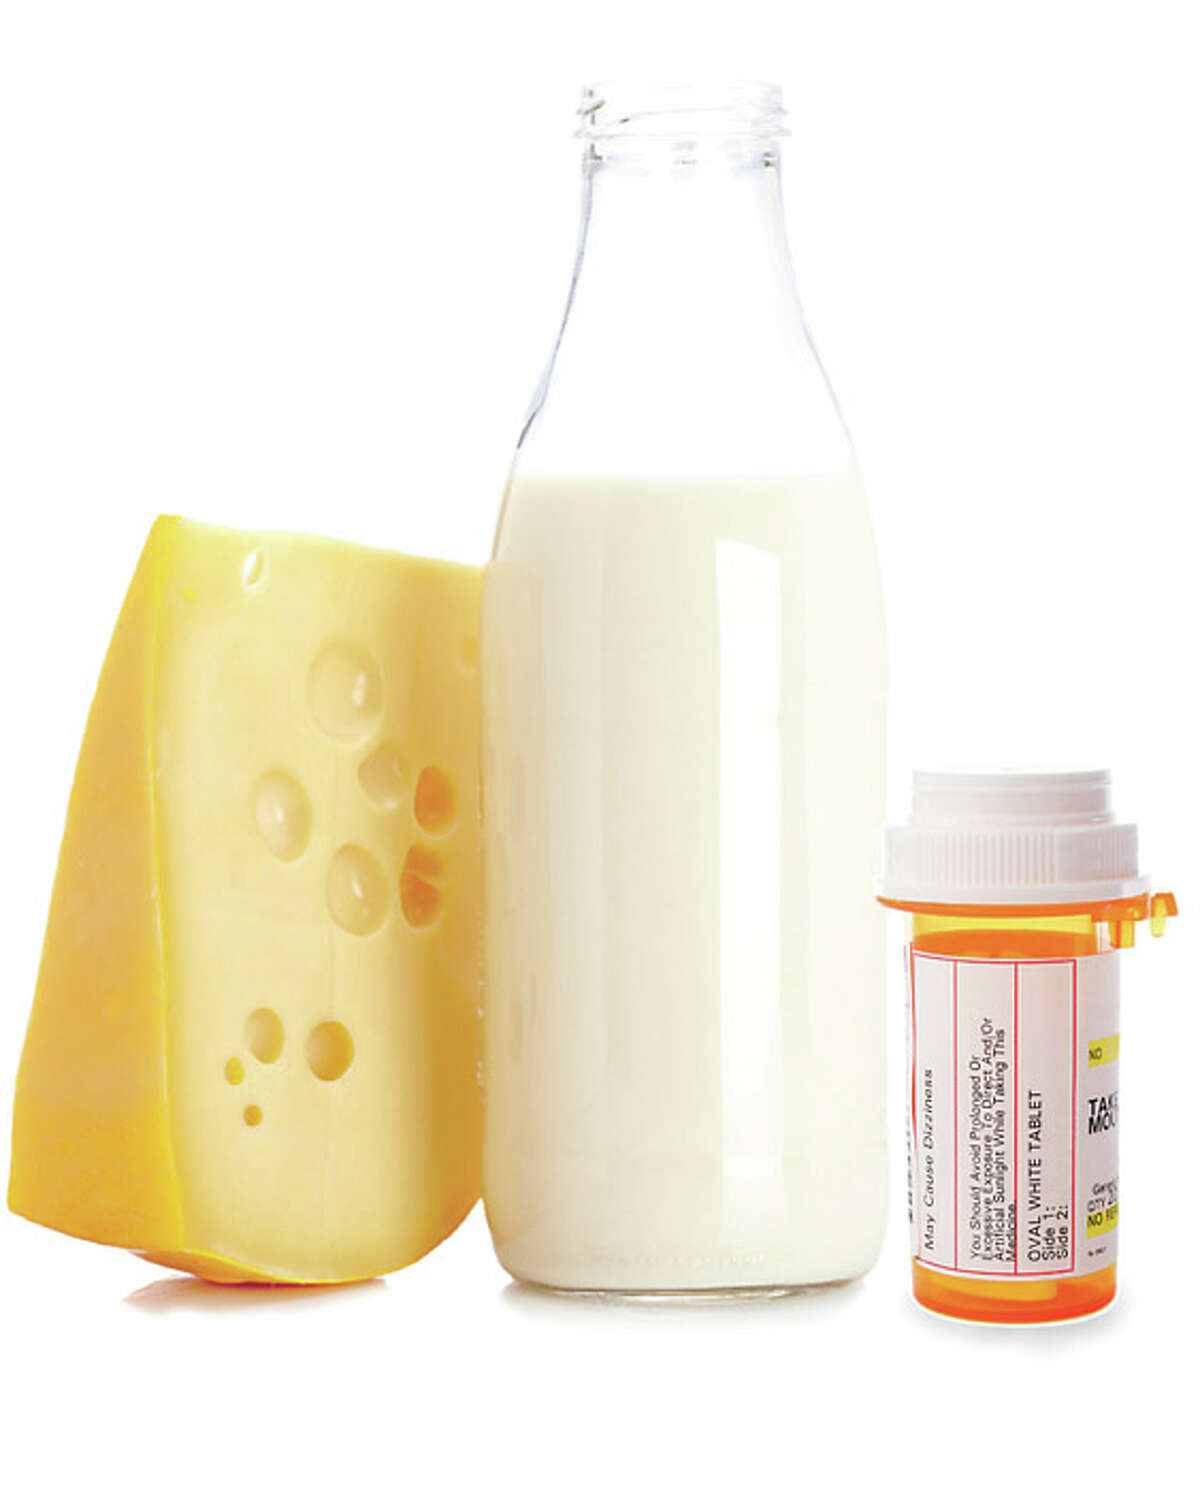 Dairy products and antibiotics Some antibiotics, including Cipro, bind to calcium, iron, and other minerals in milk-based foods. This prevents the absorption of the antibiotics, decreasing their ability to fight infections. (Dairy, Rafa Irusta Machin/iStockphoto.com; Pill Bottle, YinYang/GettyImages)